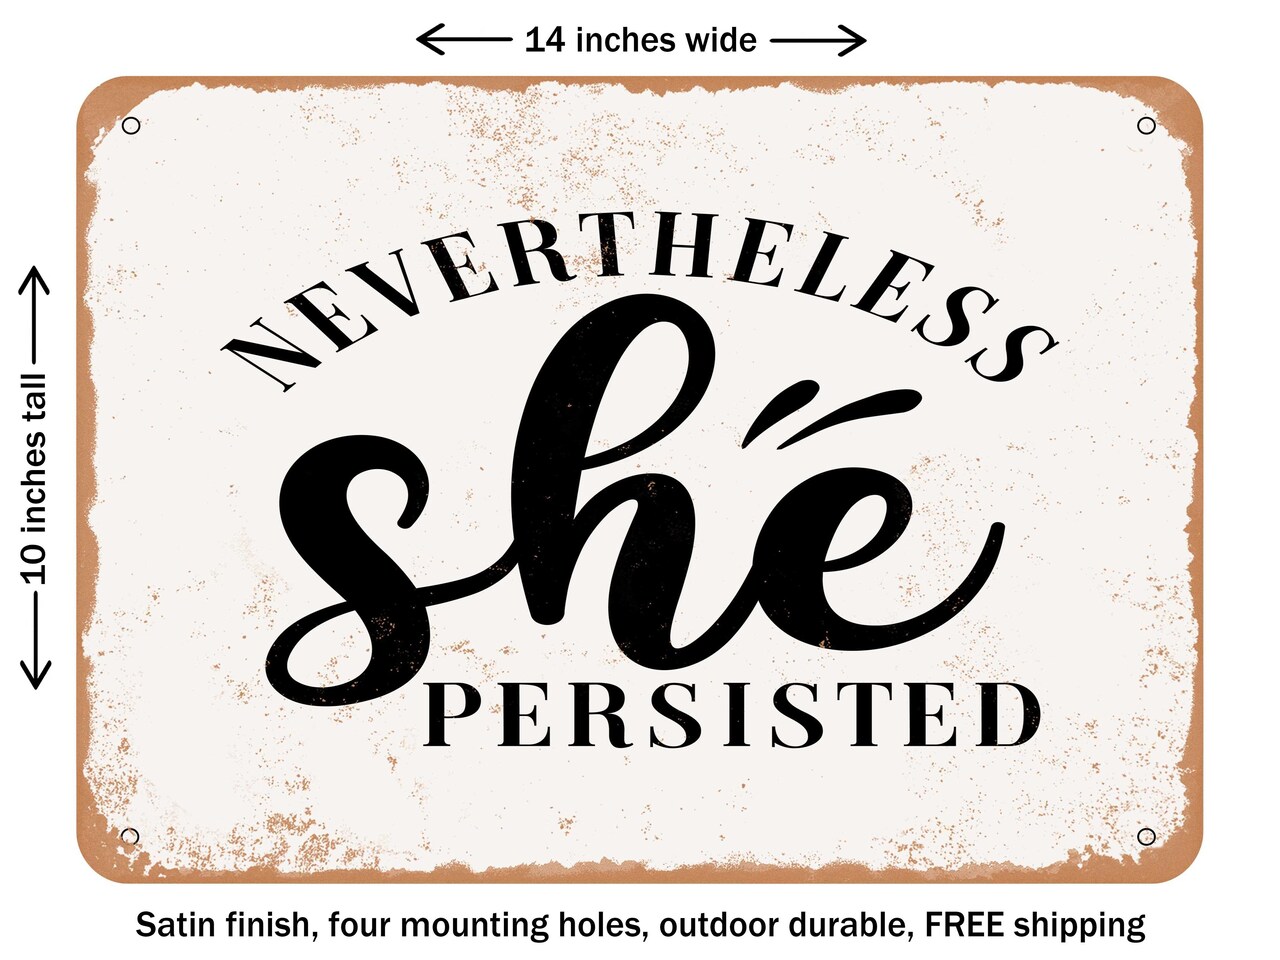 DECORATIVE METAL SIGN - Nevertheless She Persisted 2 - Vintage Rusty Look